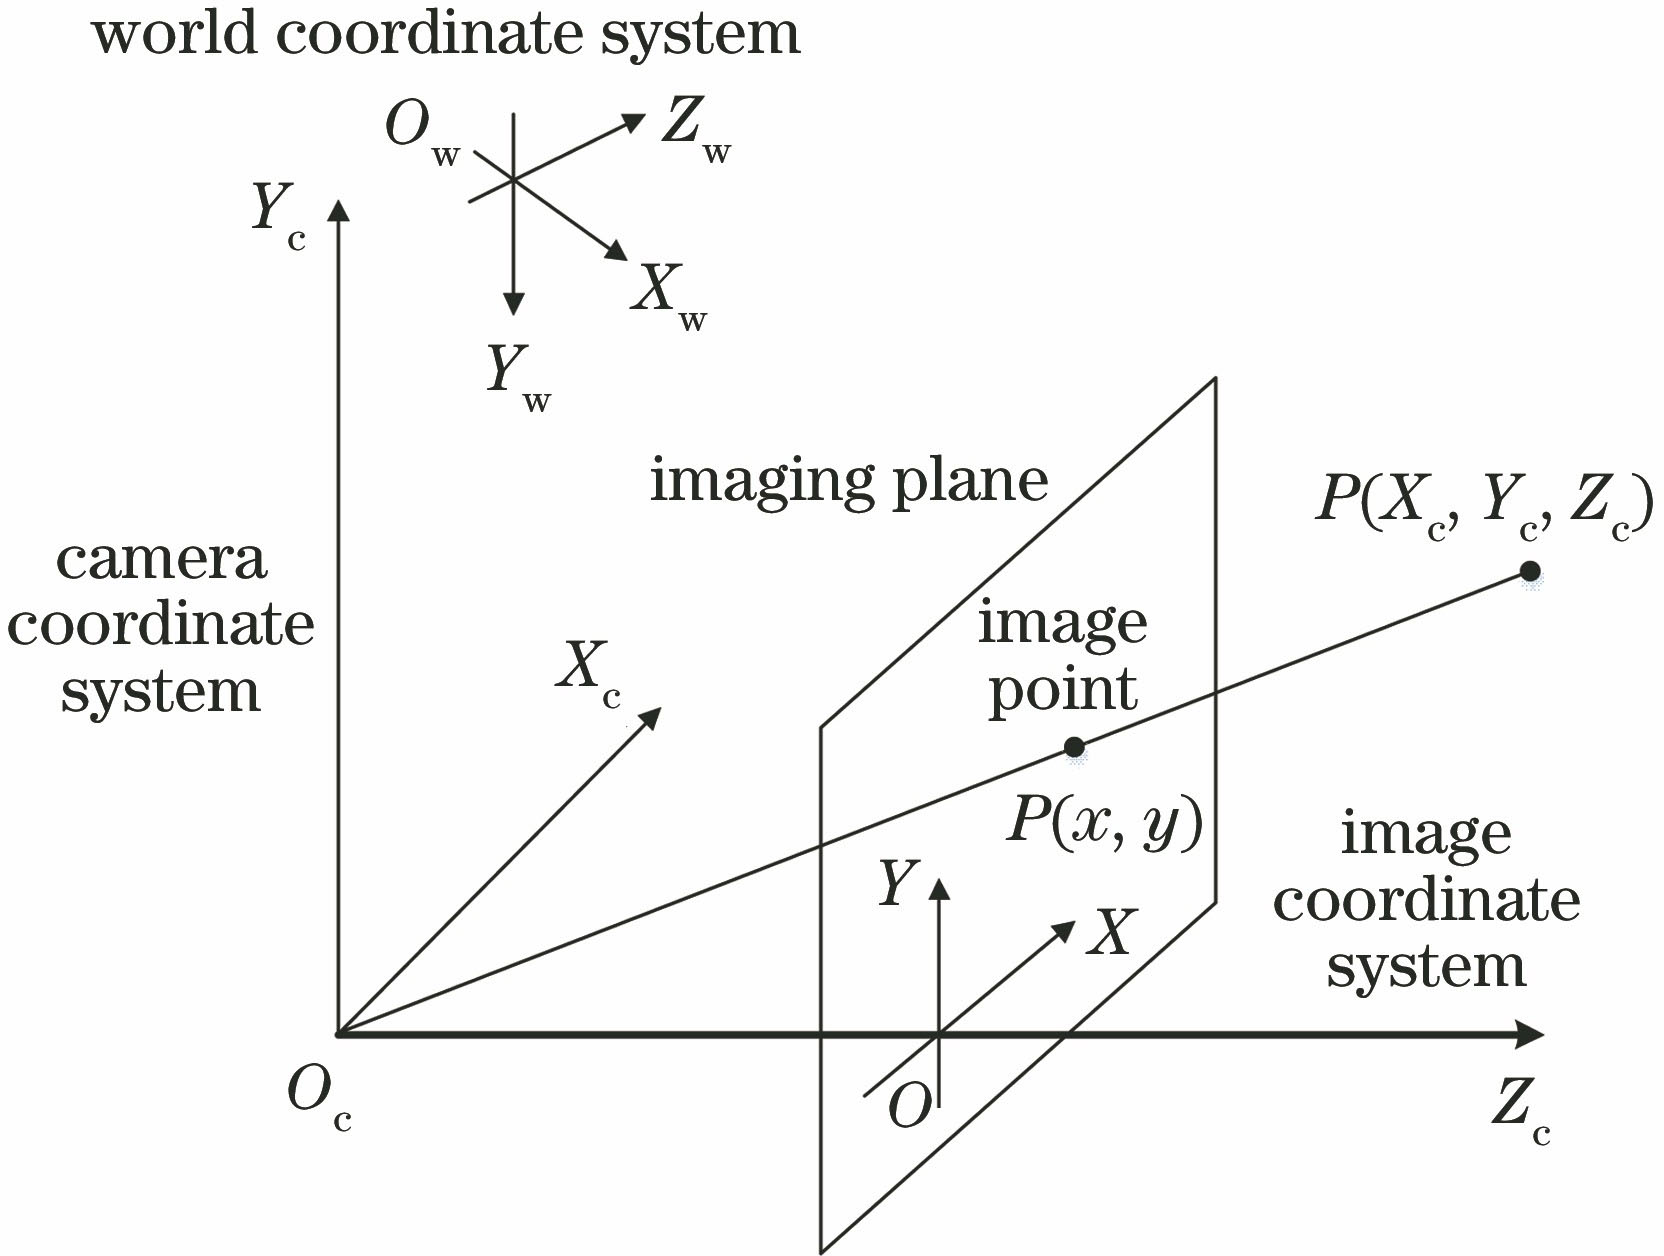 Three coordinate systems in the process of PNP positioning and navigation